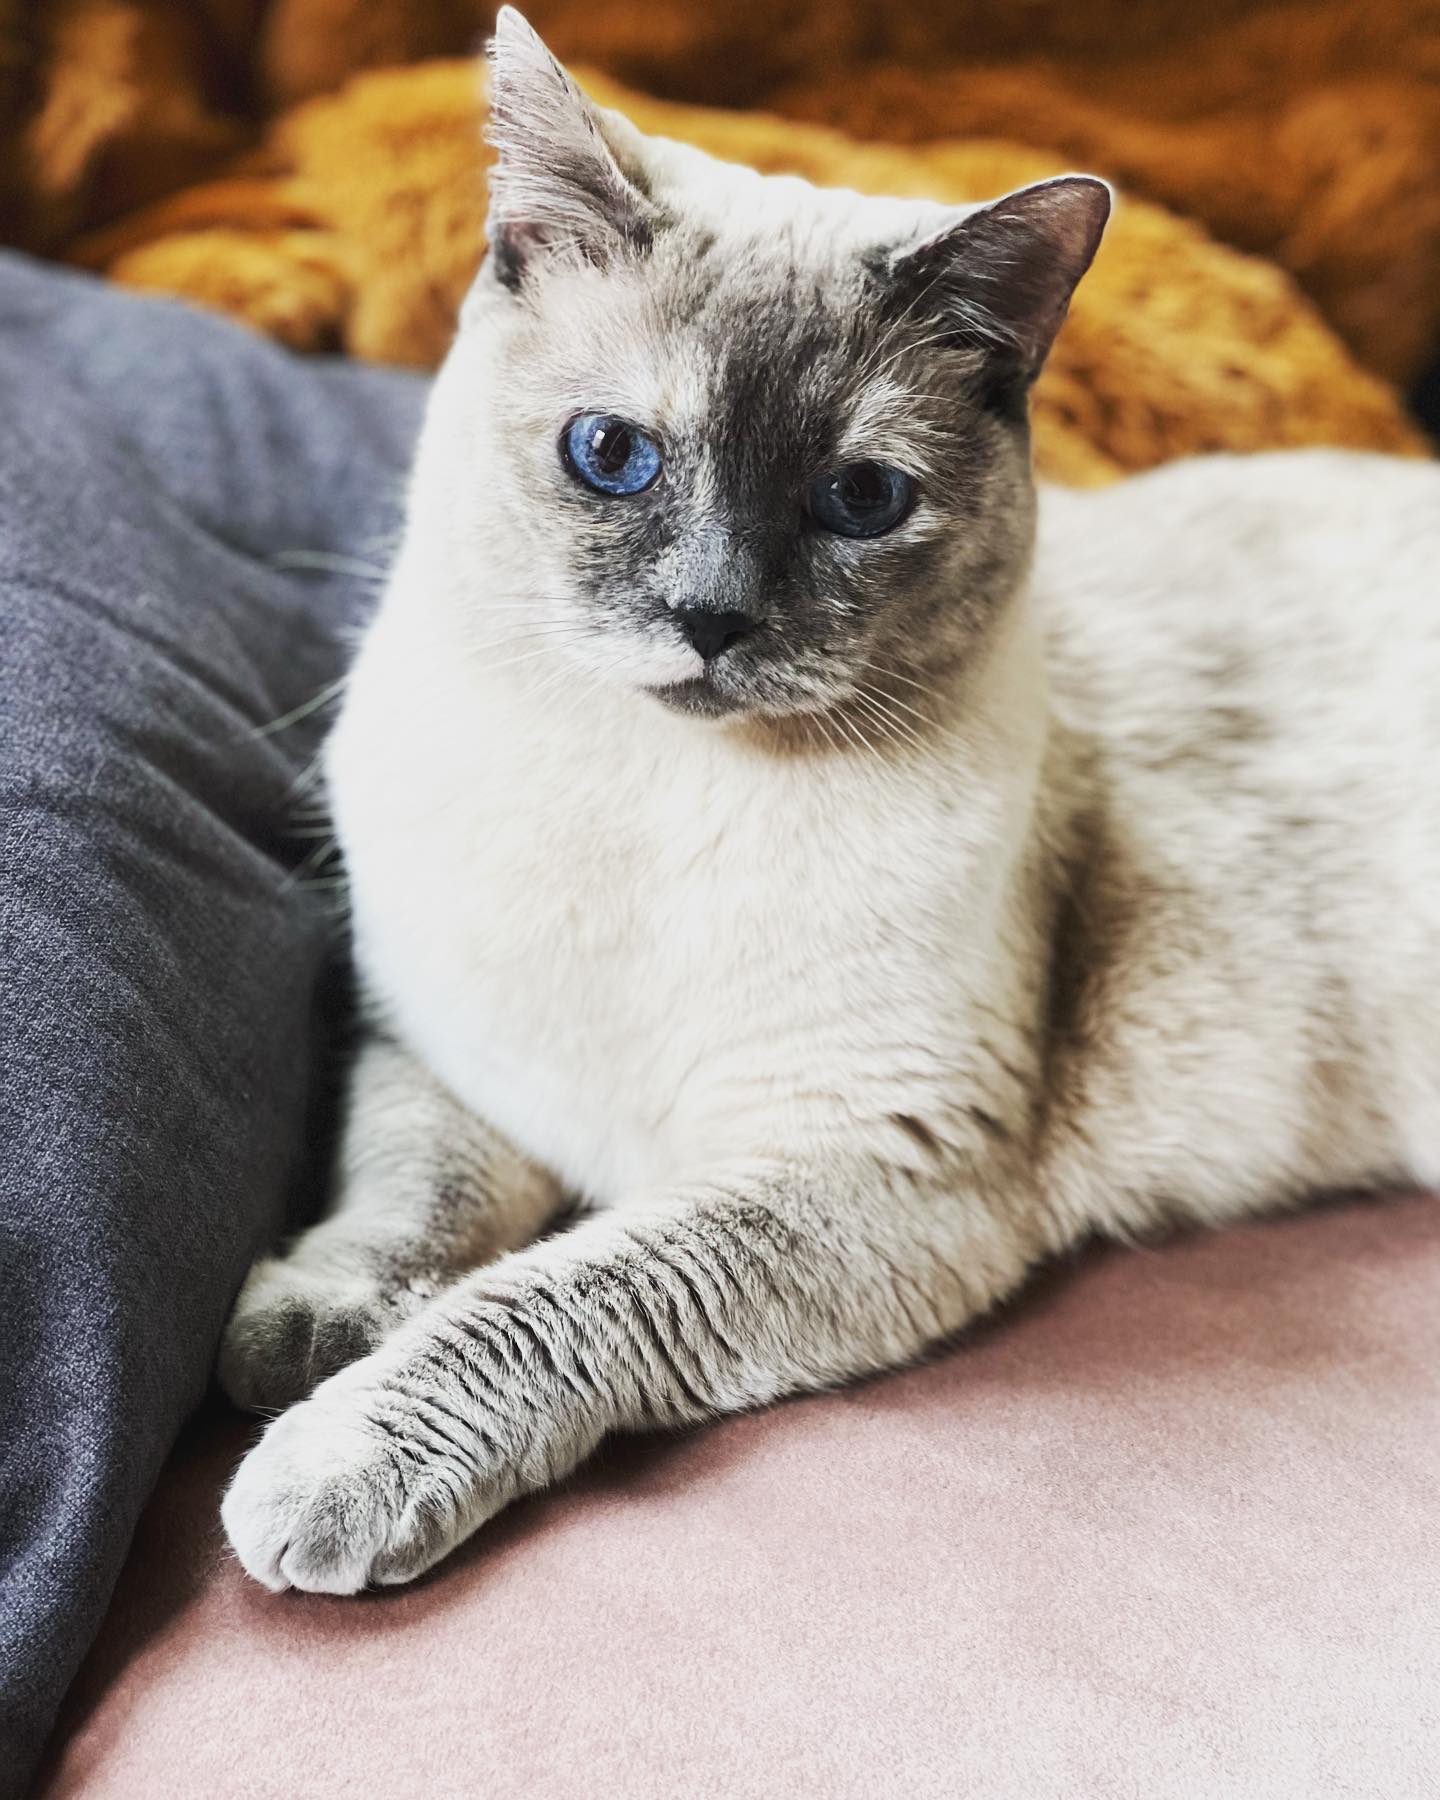 Guess who is cat sitting this adorable sweetie for three weeks.  She made herself quite at home instantly. #elegance #siamese #kittysitting